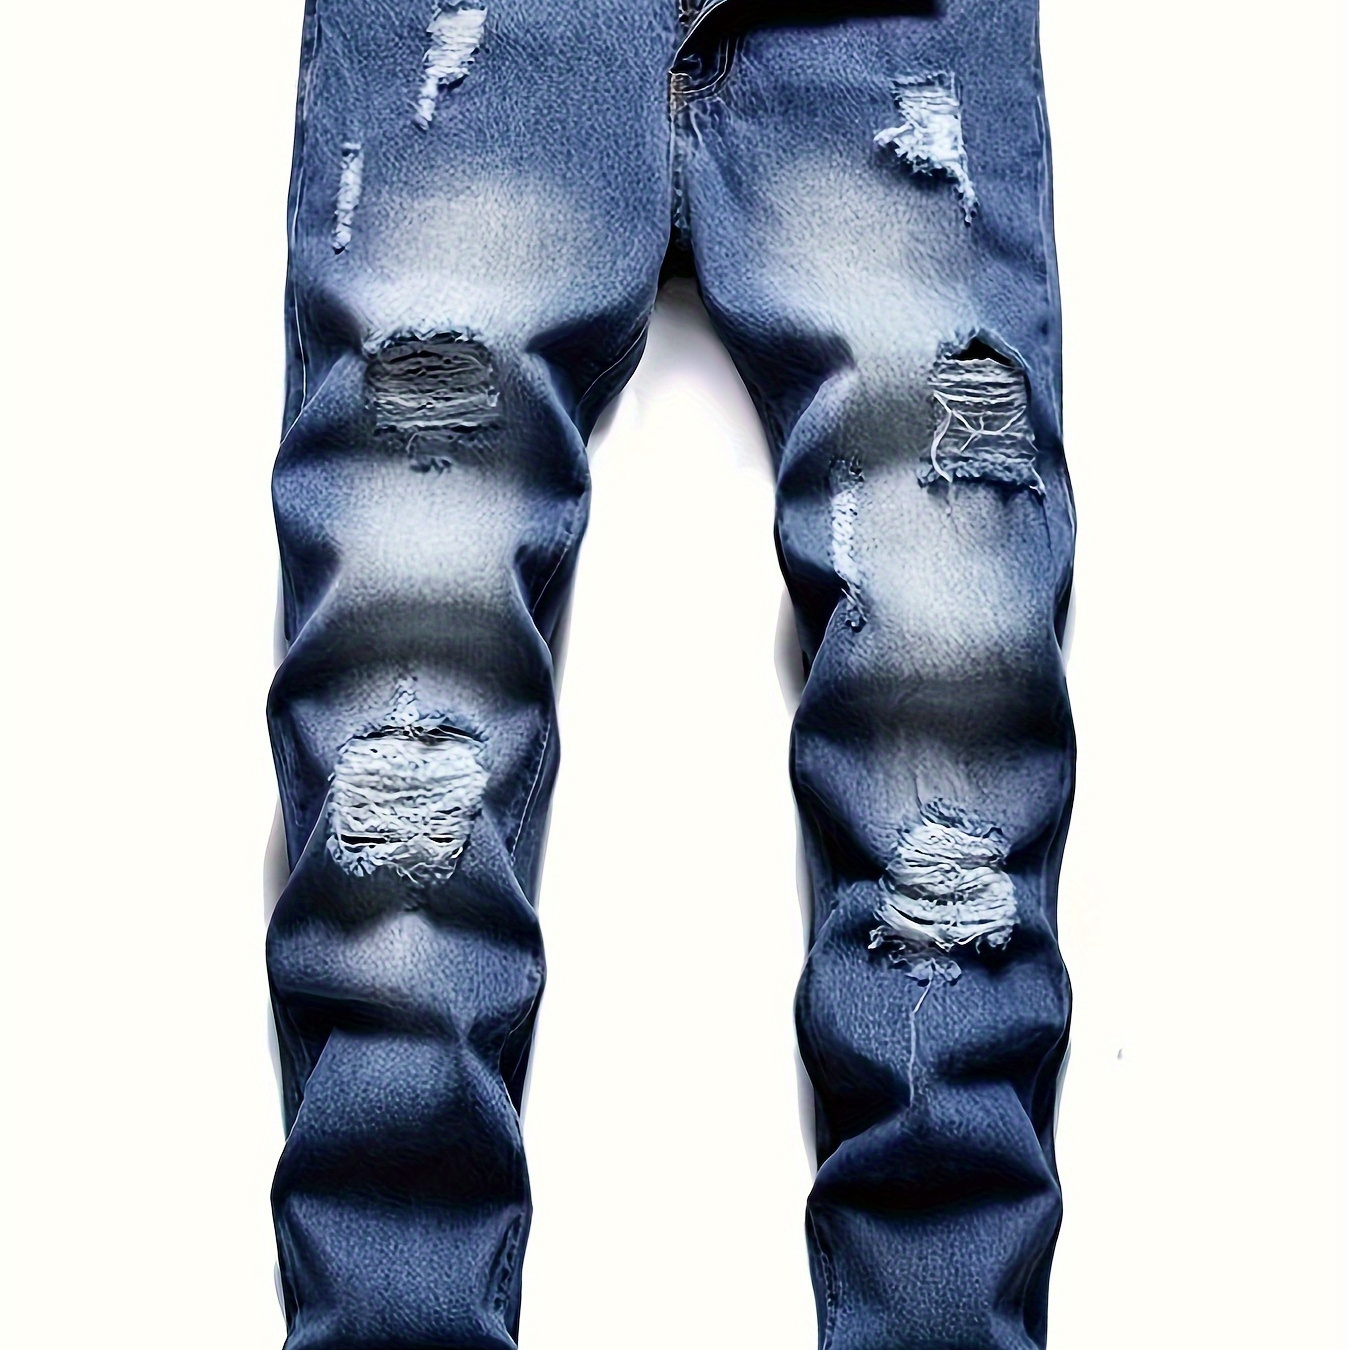 

Boys Casual Ripped Straight Leg Jeans Skinny Washed Denim Long Pants, Kids Clothes Outdoor